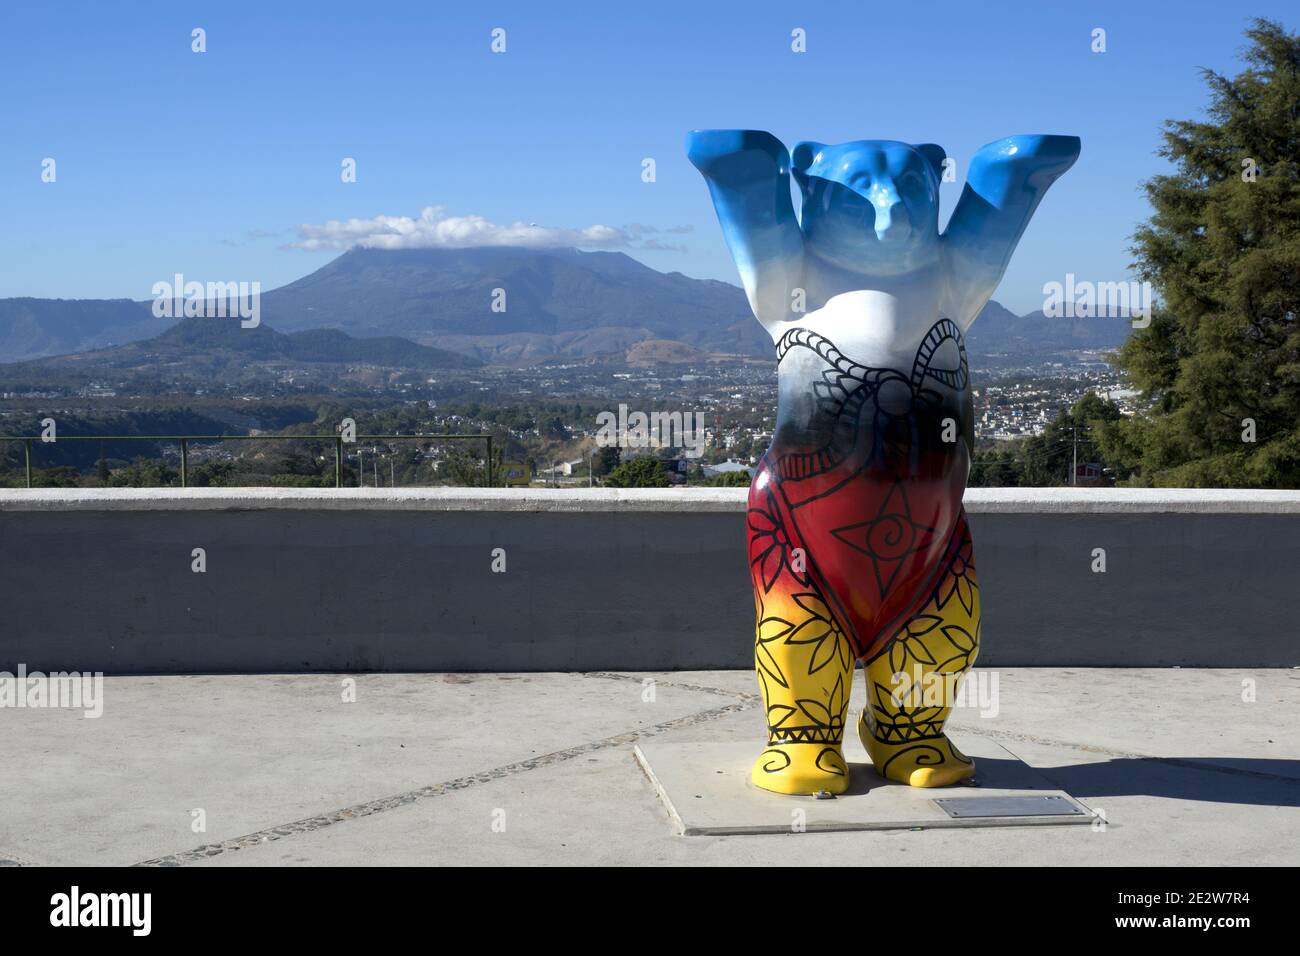 Guatemala City, Central America: Berlin square in Guatemala City with bear figure painted in Germany's national colors with vulcano in background Stock Photo